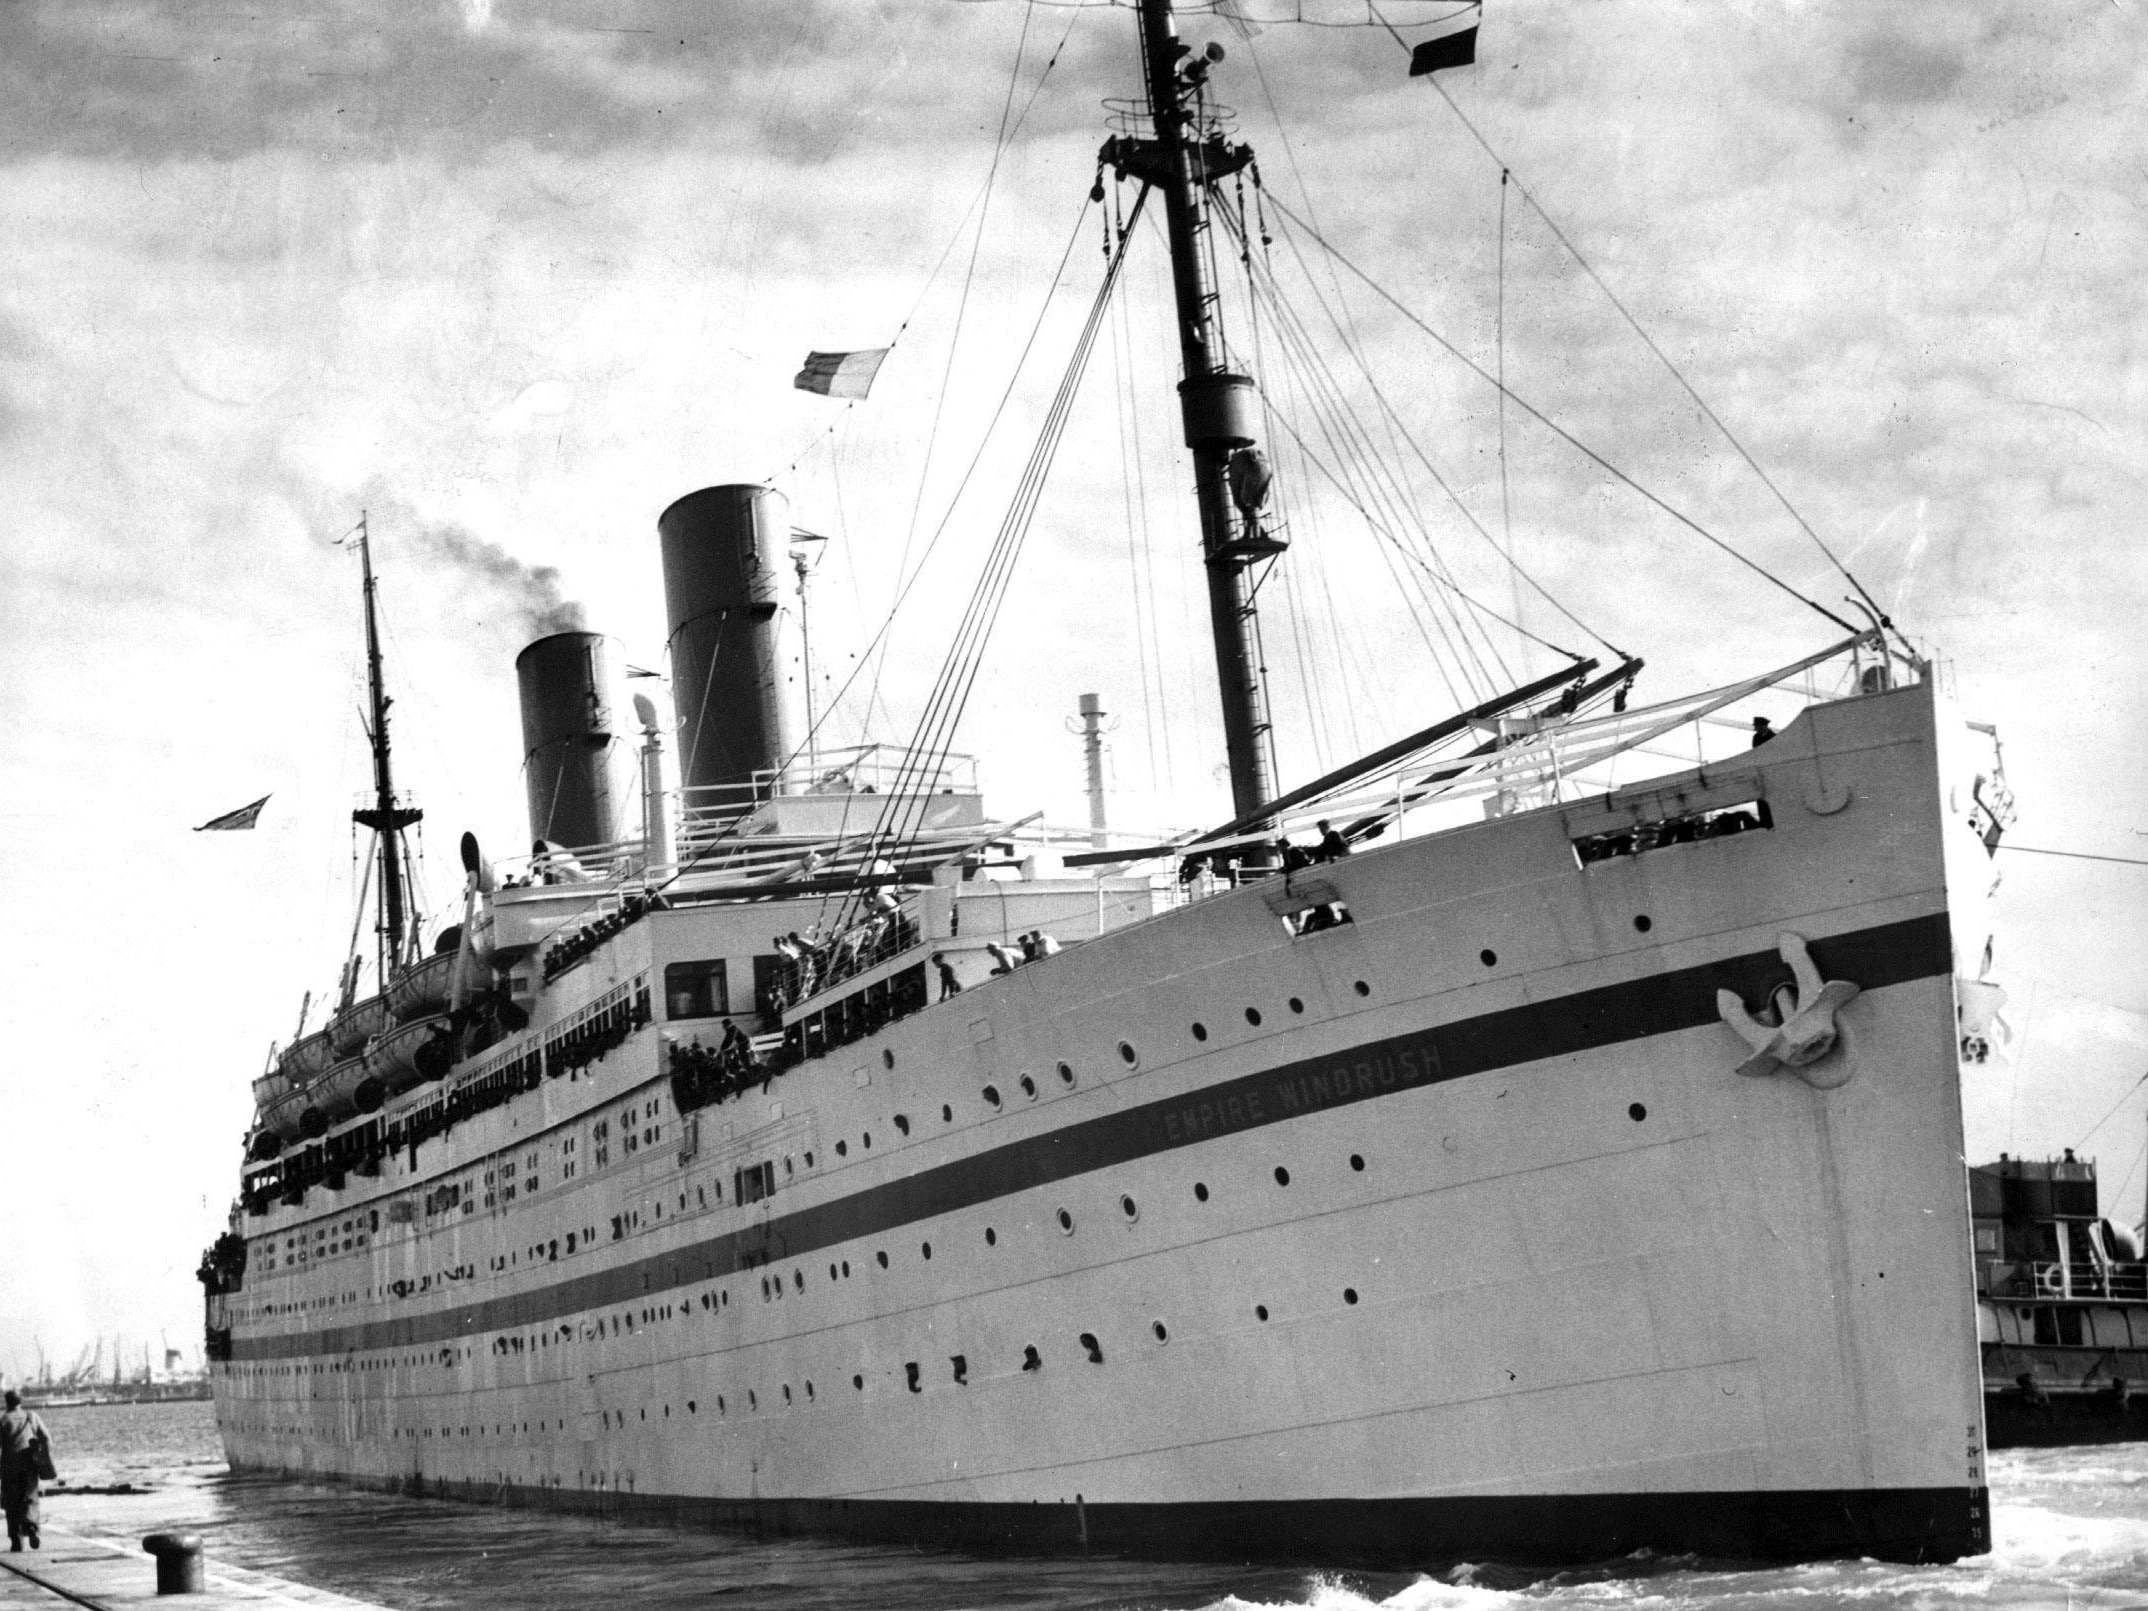 The Empire Windrush carried hundreds of passengers from the Caribbean in 1948